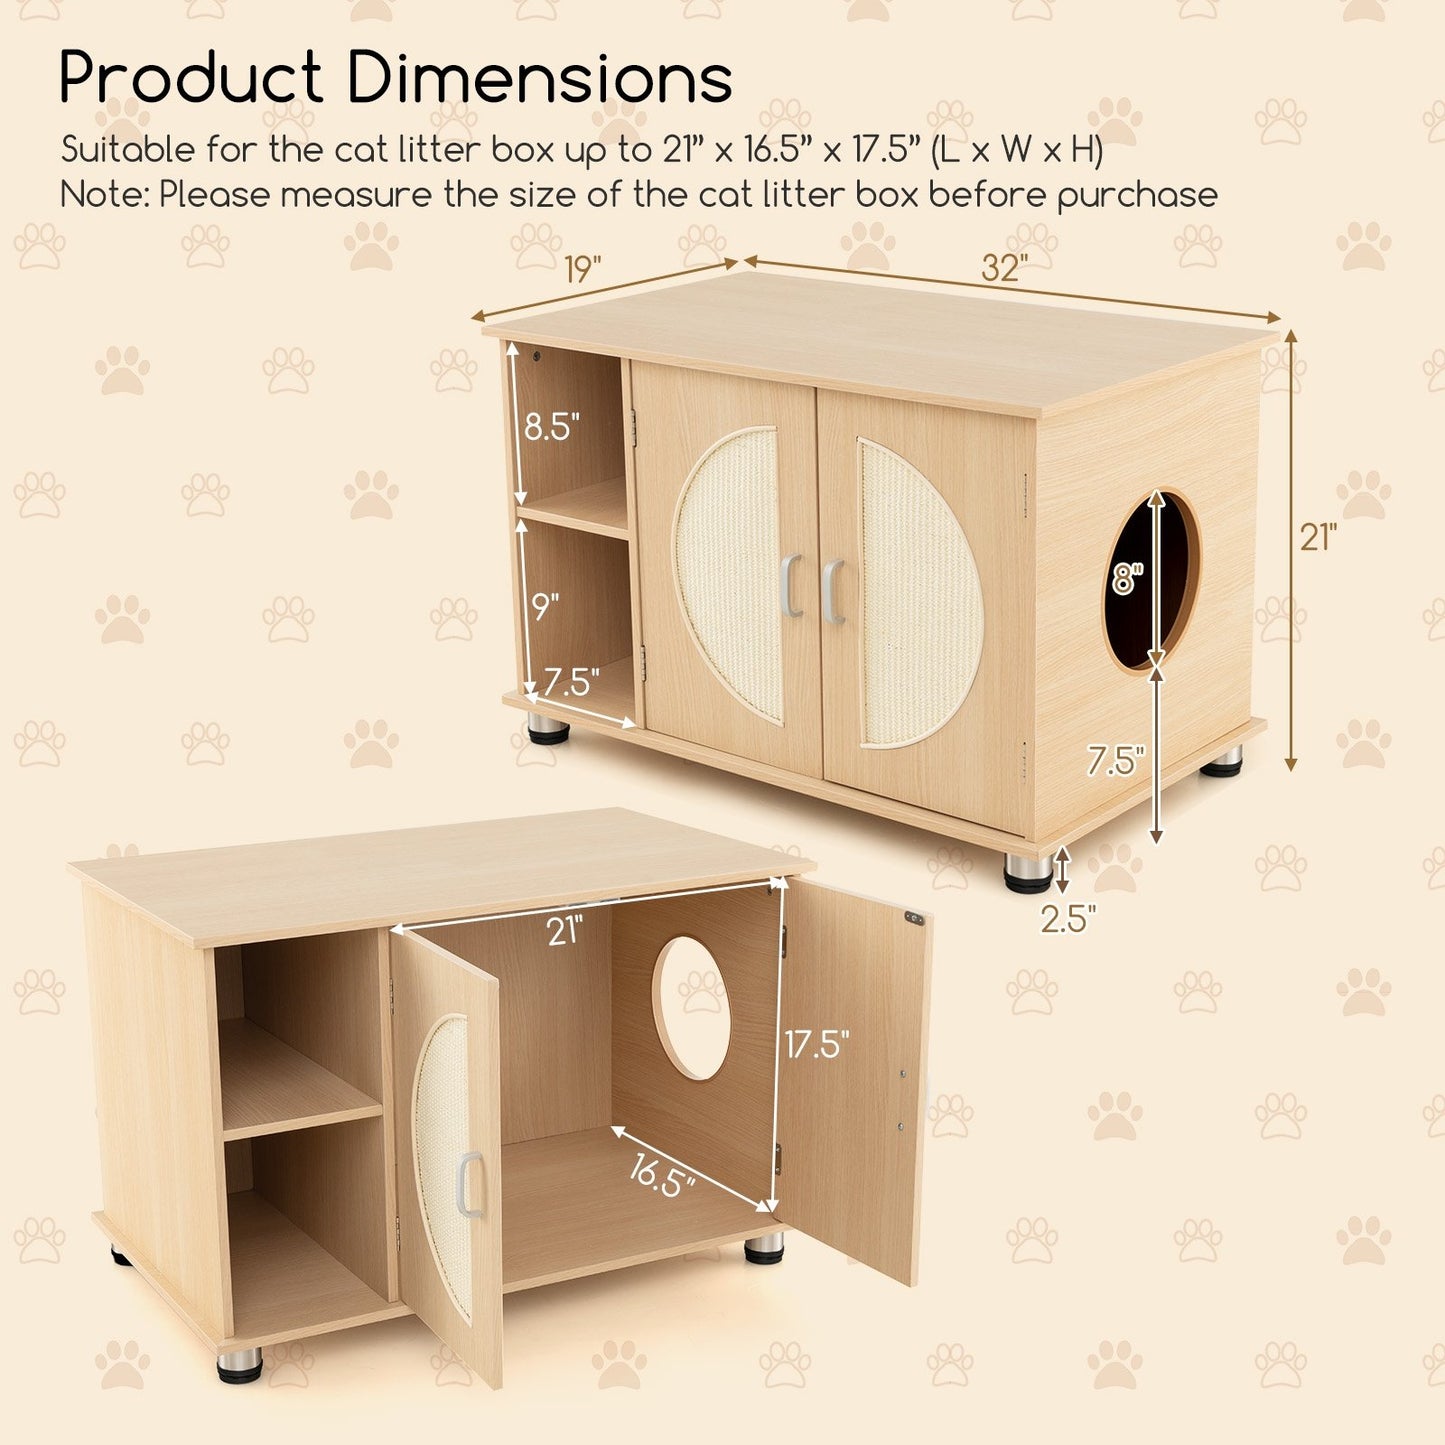 Cat Litter Box Enclosure with Sisal Scratching Doors and Adjustable Metal Feet, Natural